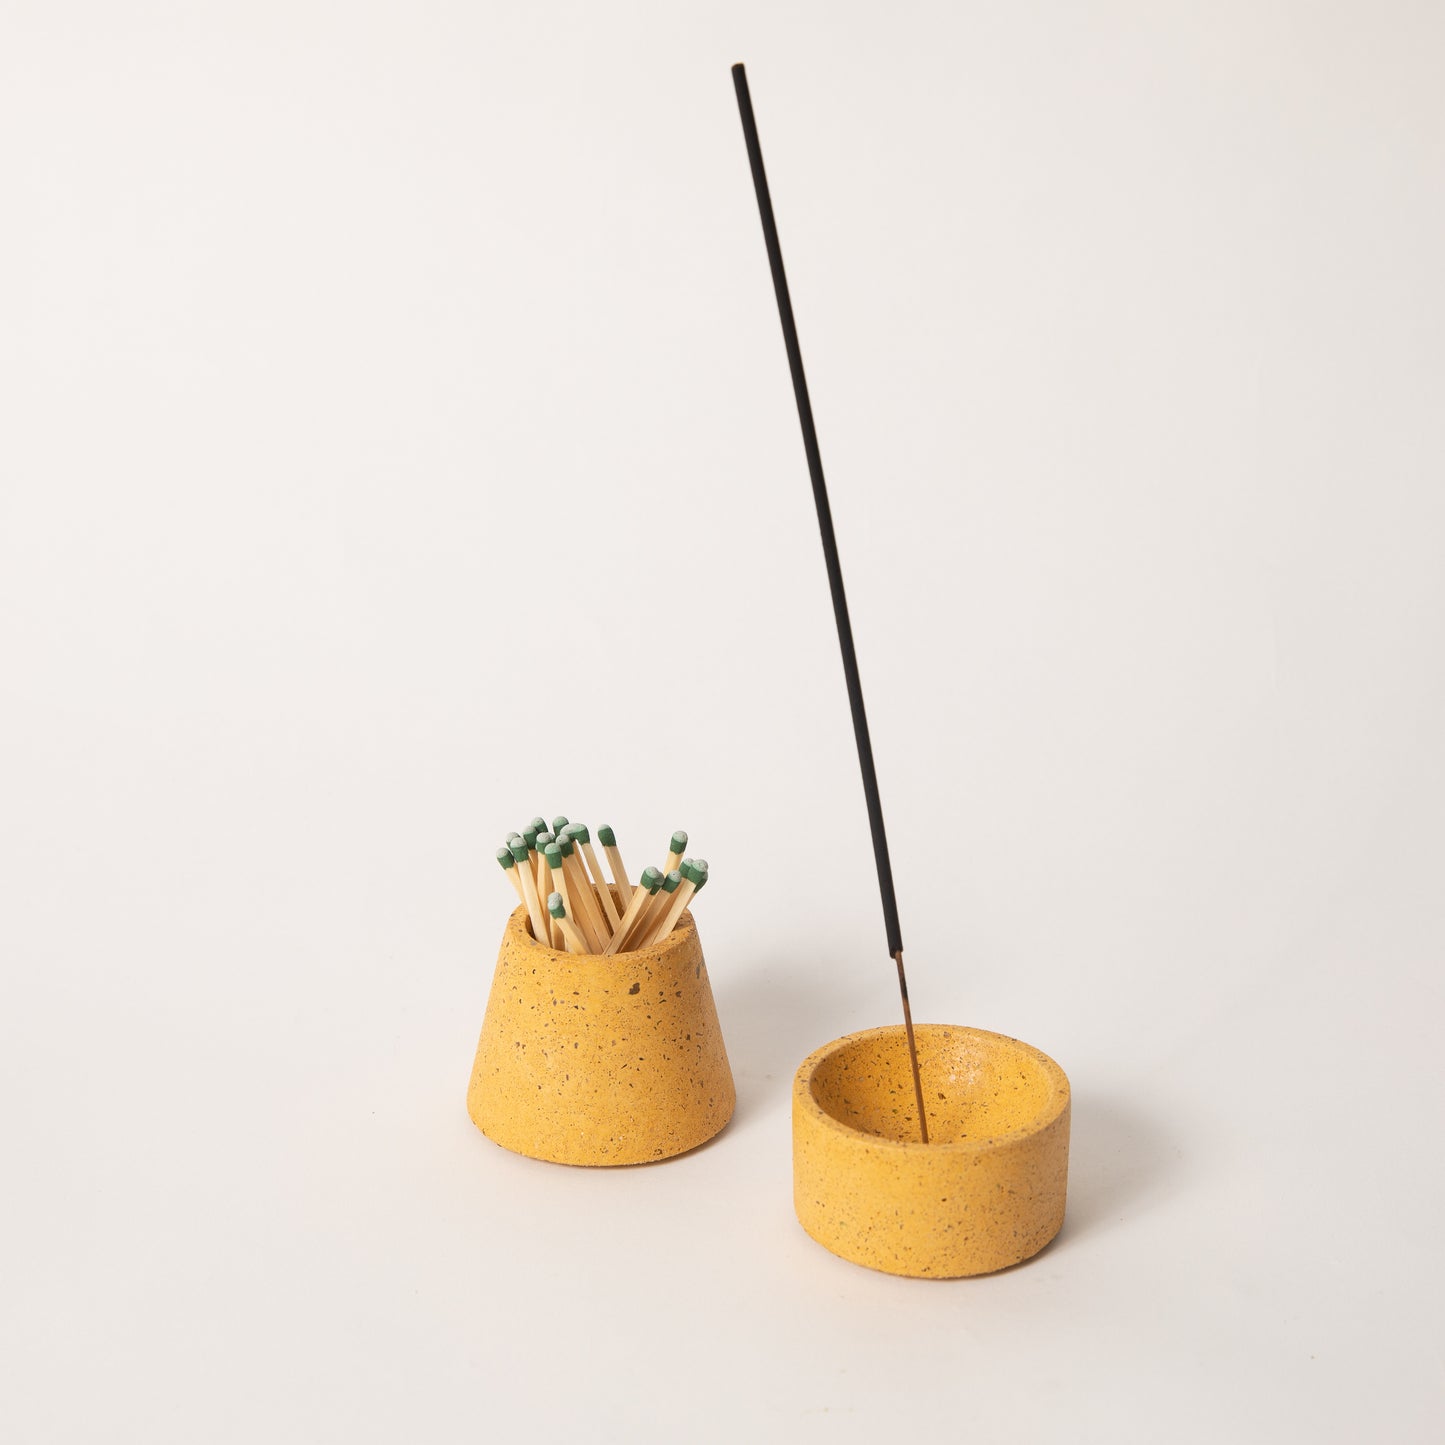 Marigold terrazzo matchstick & incense holder set, styled with strike-anywhere matches & an incense stick.